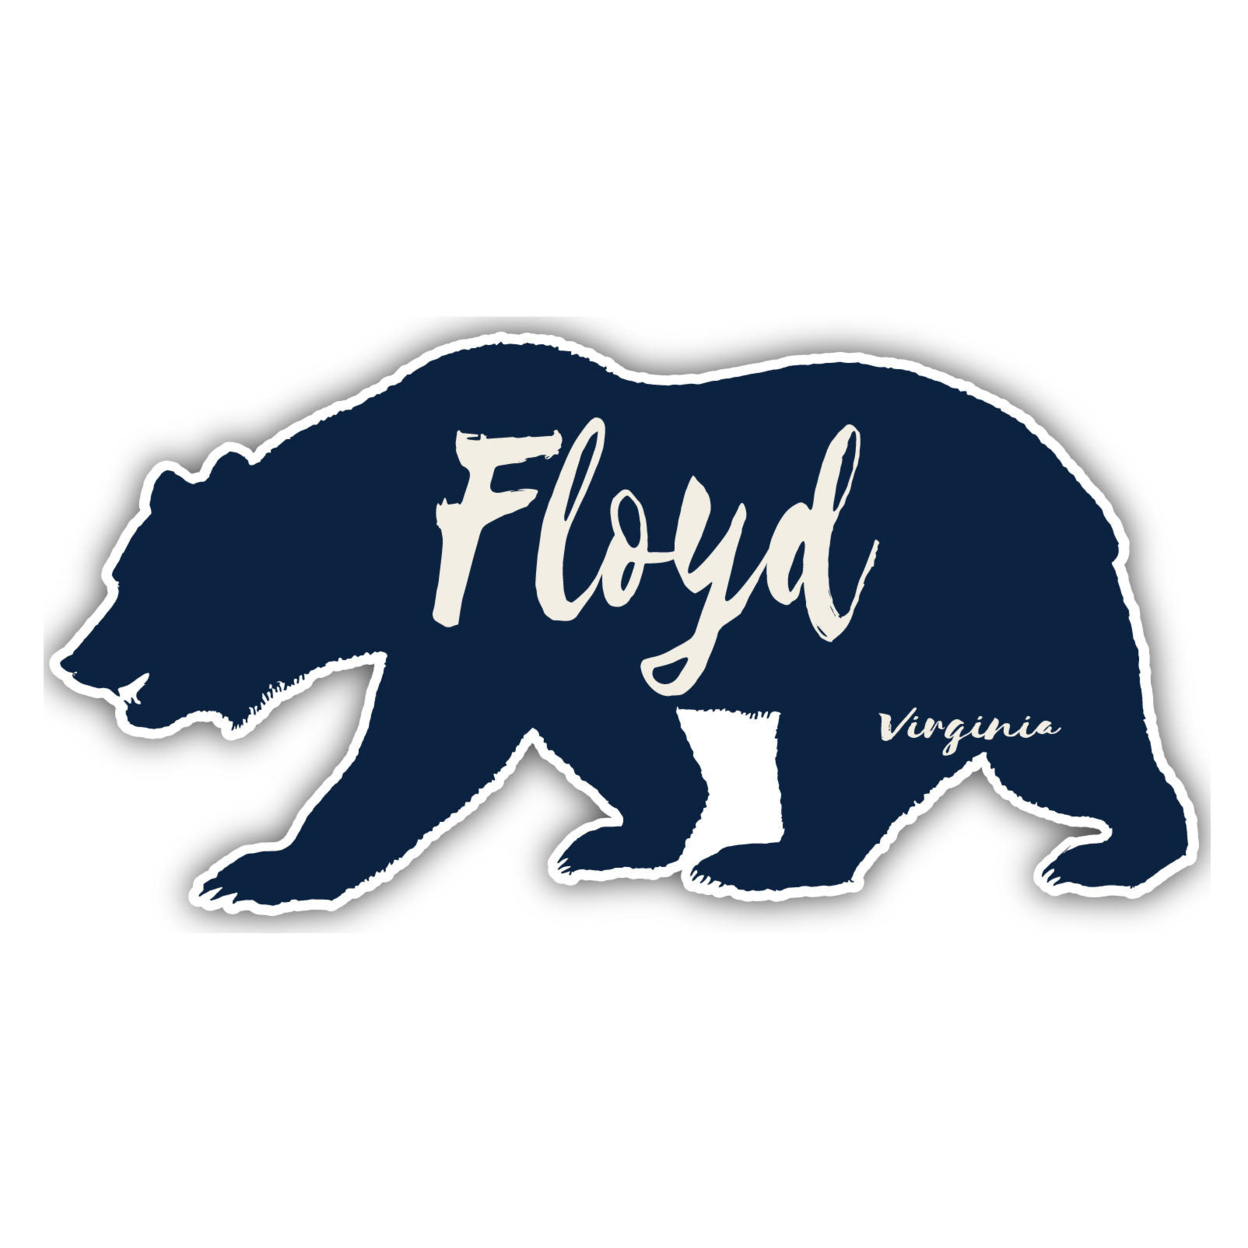 Floyd Virginia Souvenir Decorative Stickers (Choose Theme And Size) - 4-Pack, 8-Inch, Great Outdoors